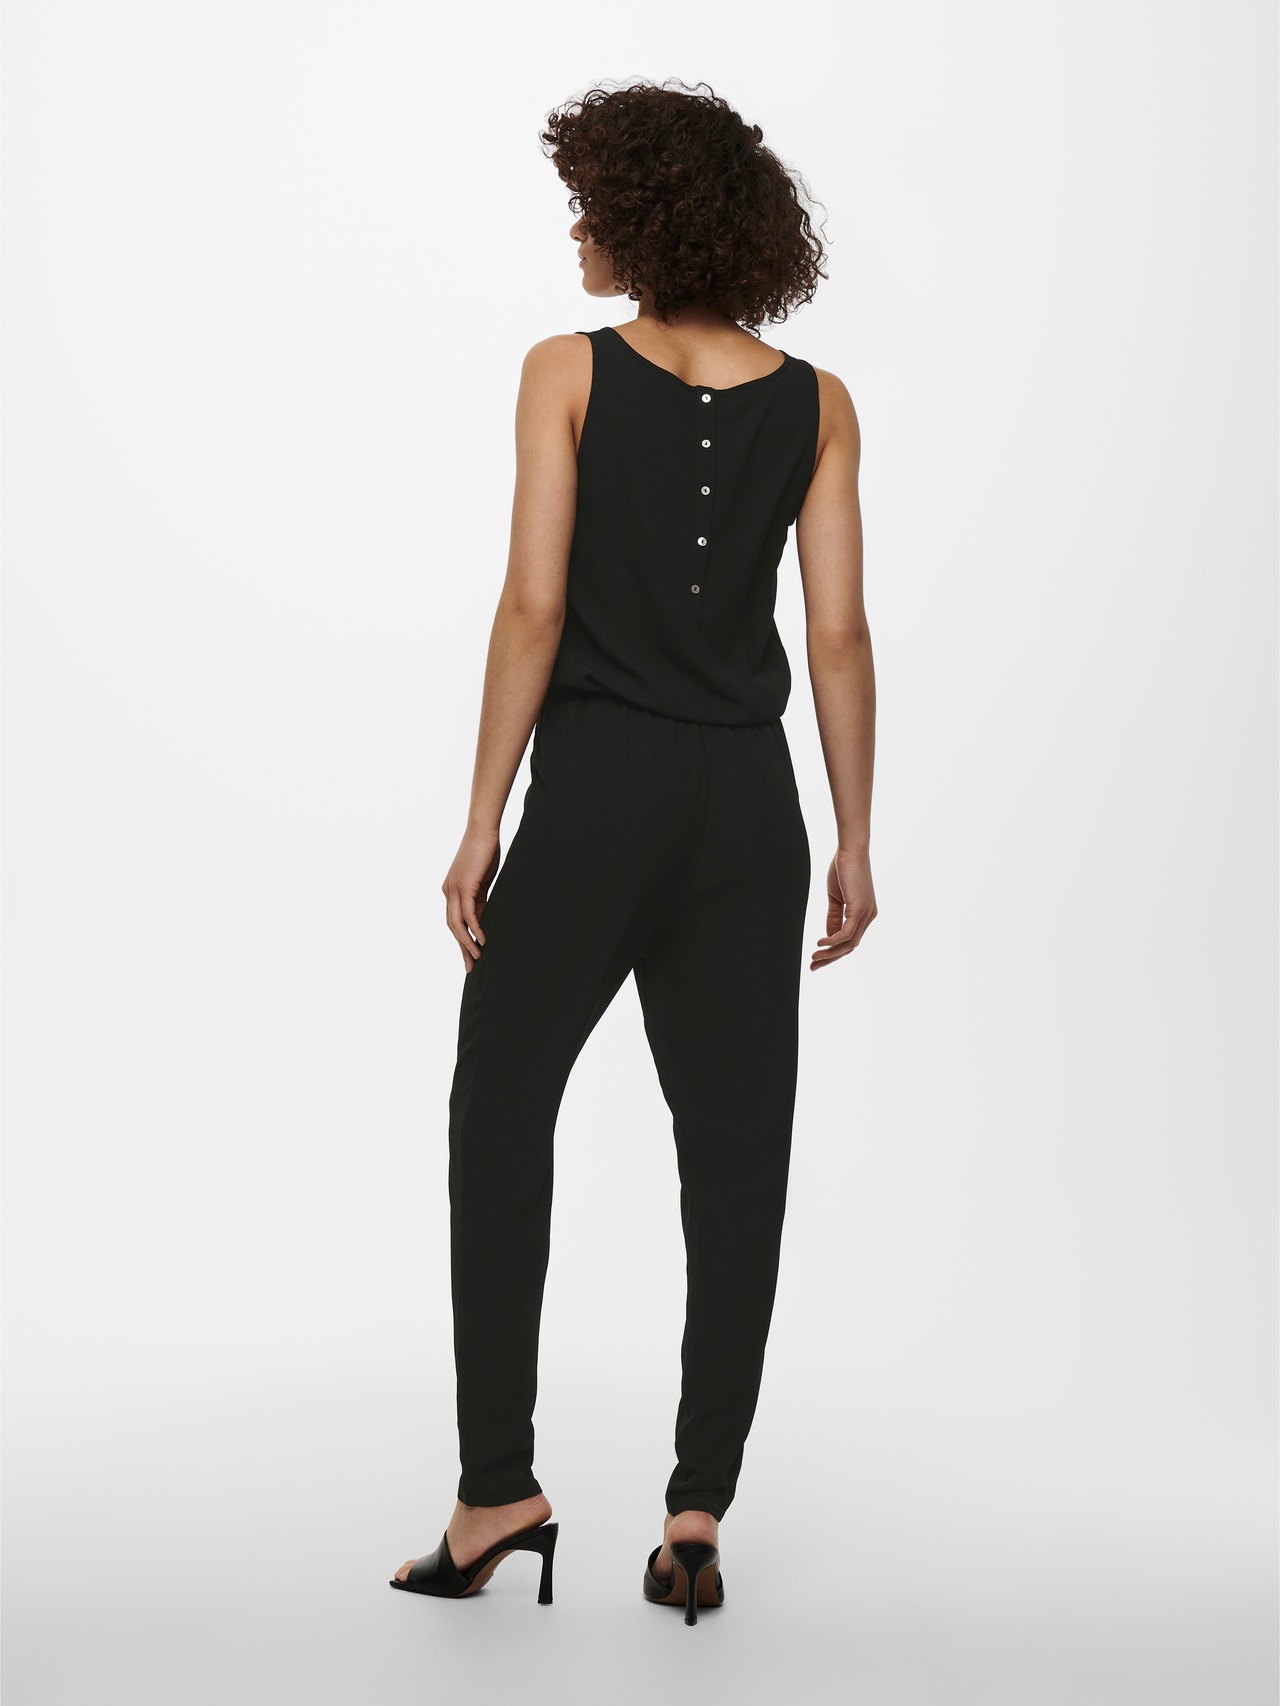 ONLY Solid colored Jumpsuit -Black - 15236581